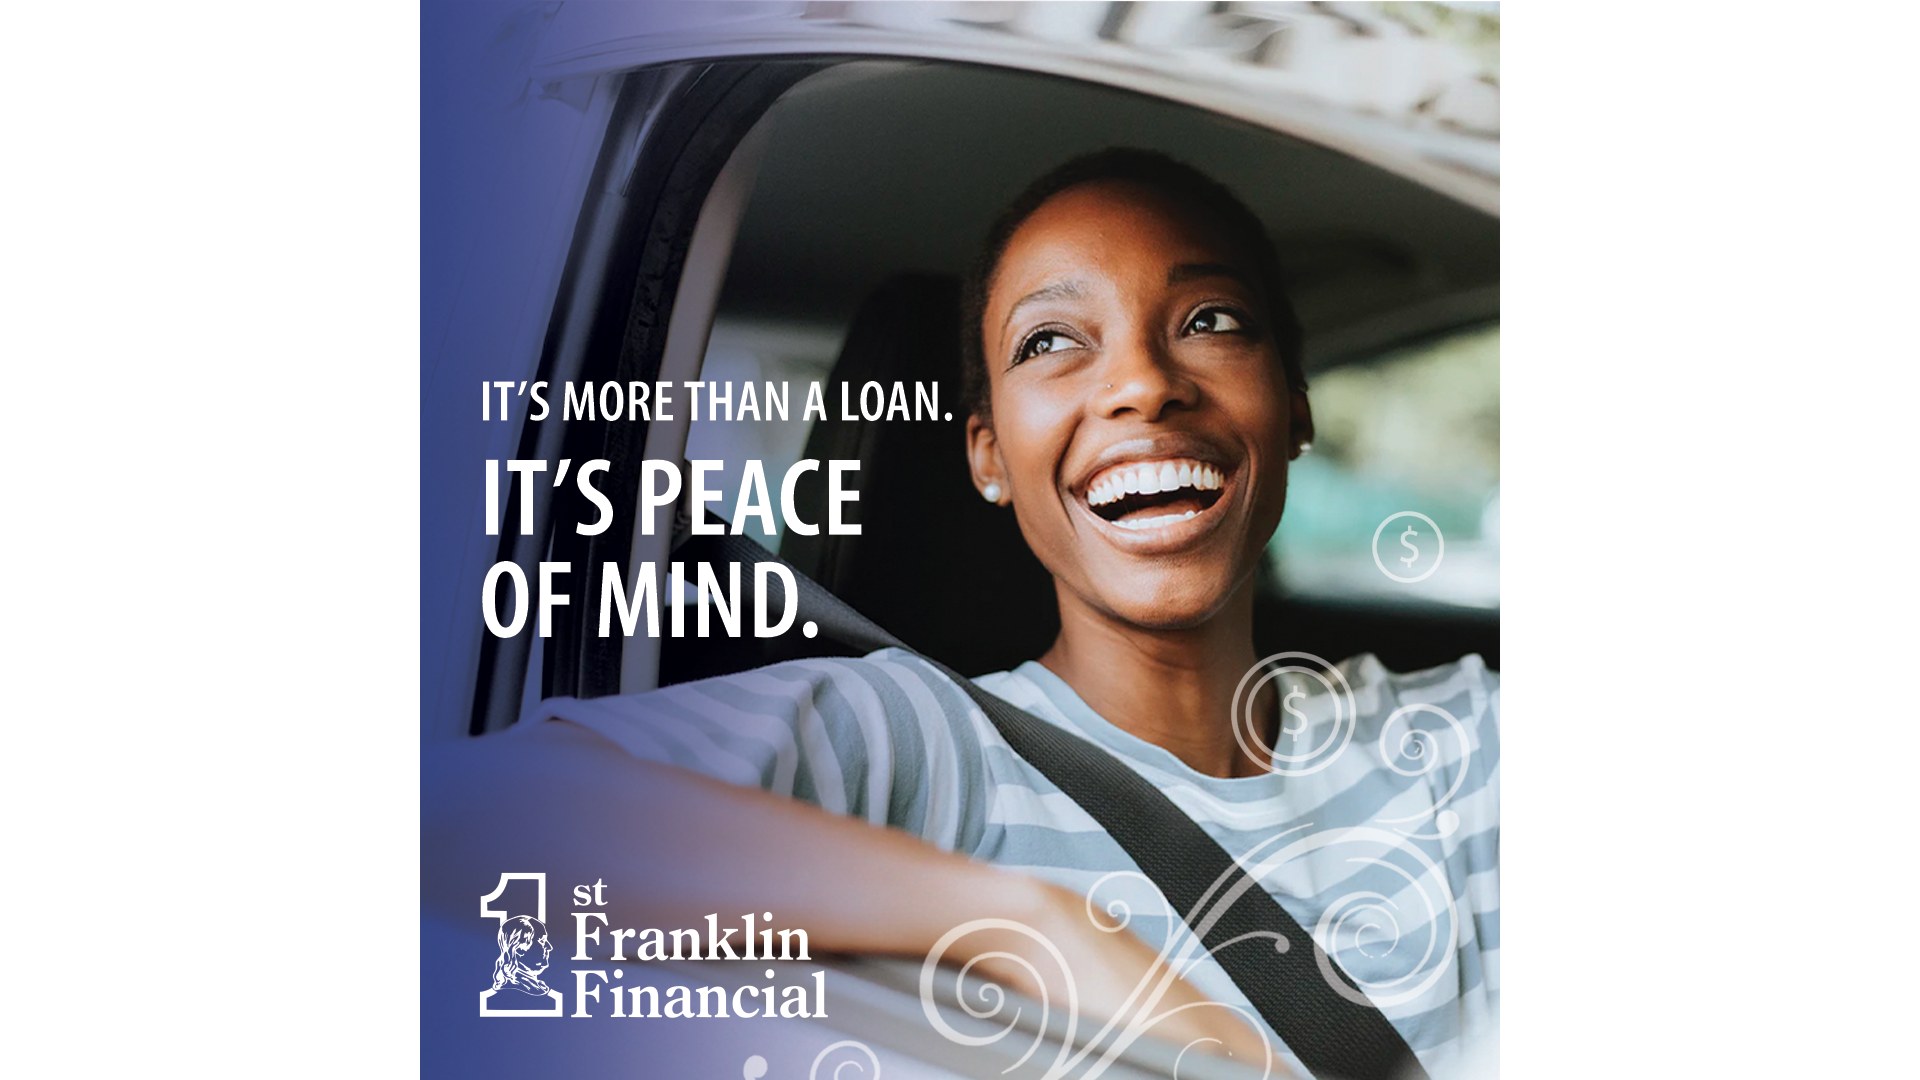 1st Franklin Financial 3704 Hwy 411 Suite 3, Madisonville Tennessee 37354